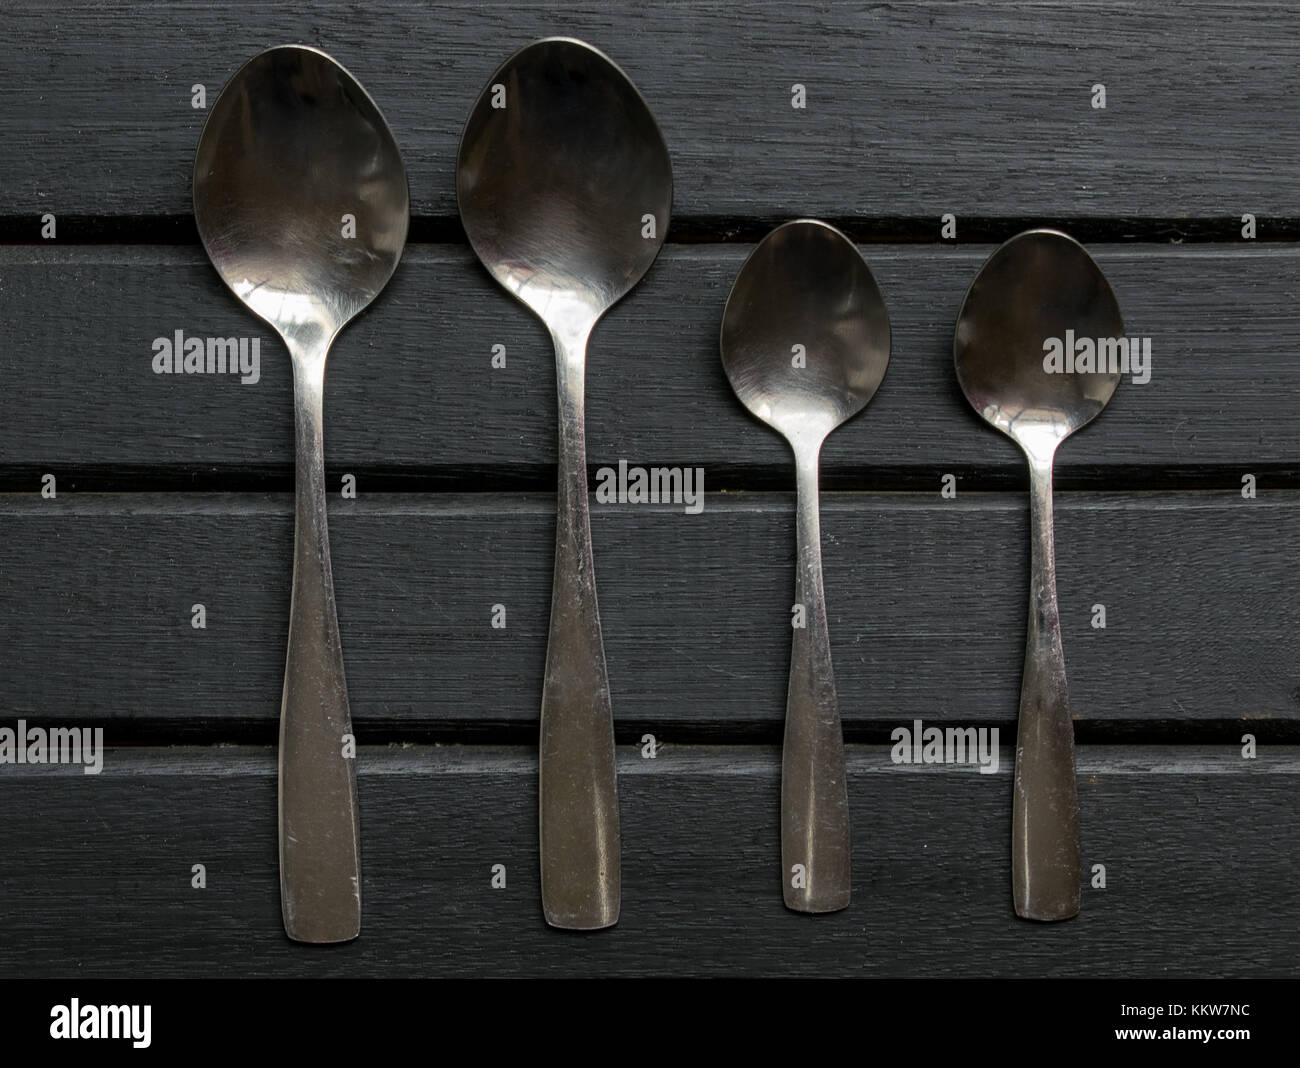 Set of four silver spoons on top of a black wooden surface background tabletop, aligned and organized Stock Photo